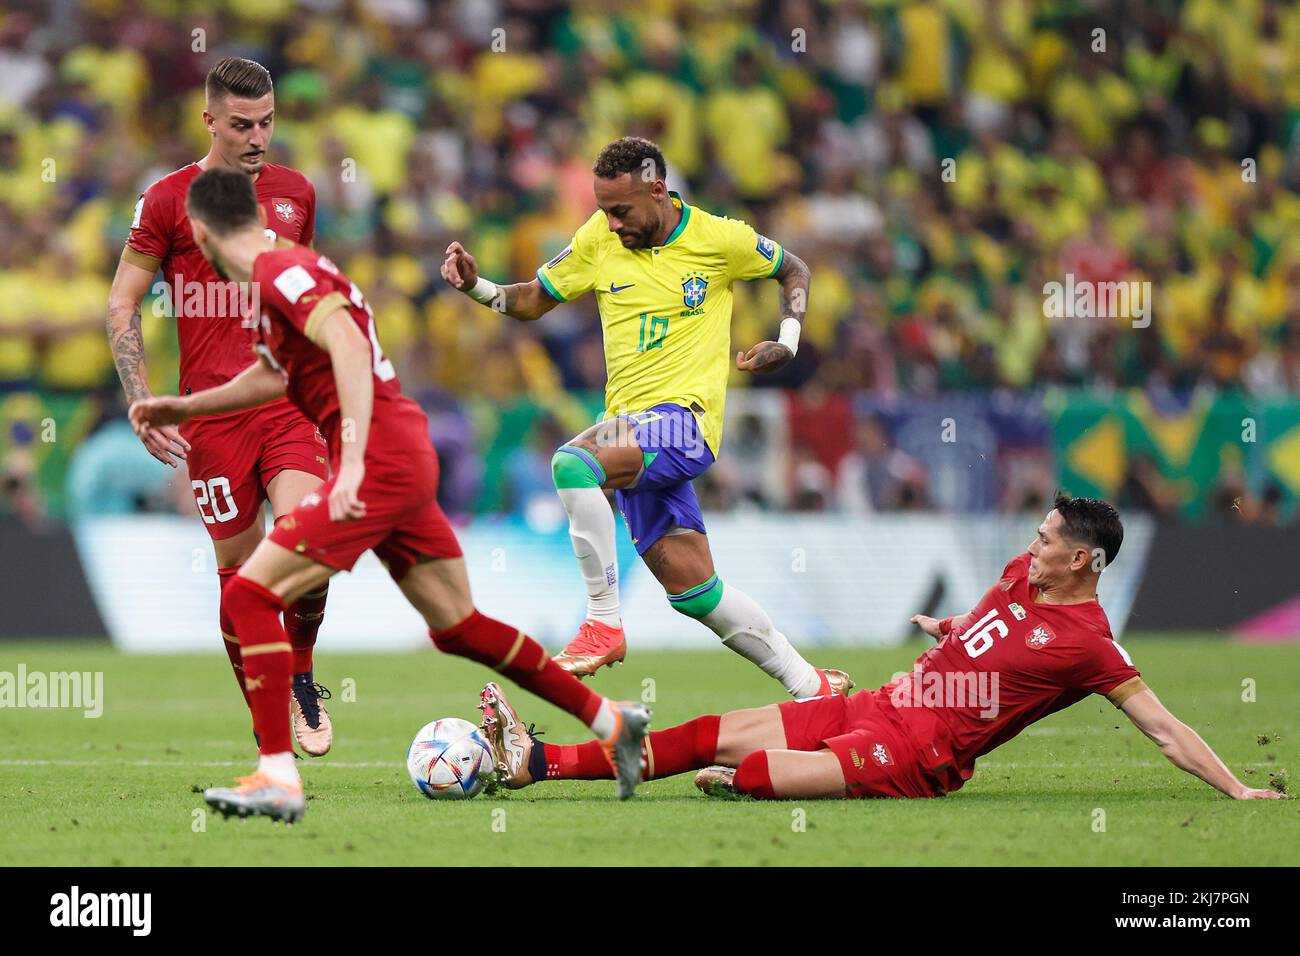 Lusail, Qatar. 24th Nov, 2022. Neymar (2nd R) of Brazil competes with Sasa Lukic (1st R) of Serbia during the Group G match between Brazil and Serbia at the 2022 FIFA World Cup at Lusail Stadium in Lusail, Qatar, Nov. 24, 2022. Credit: Wang Lili/Xinhua/Alamy Live News Stock Photo